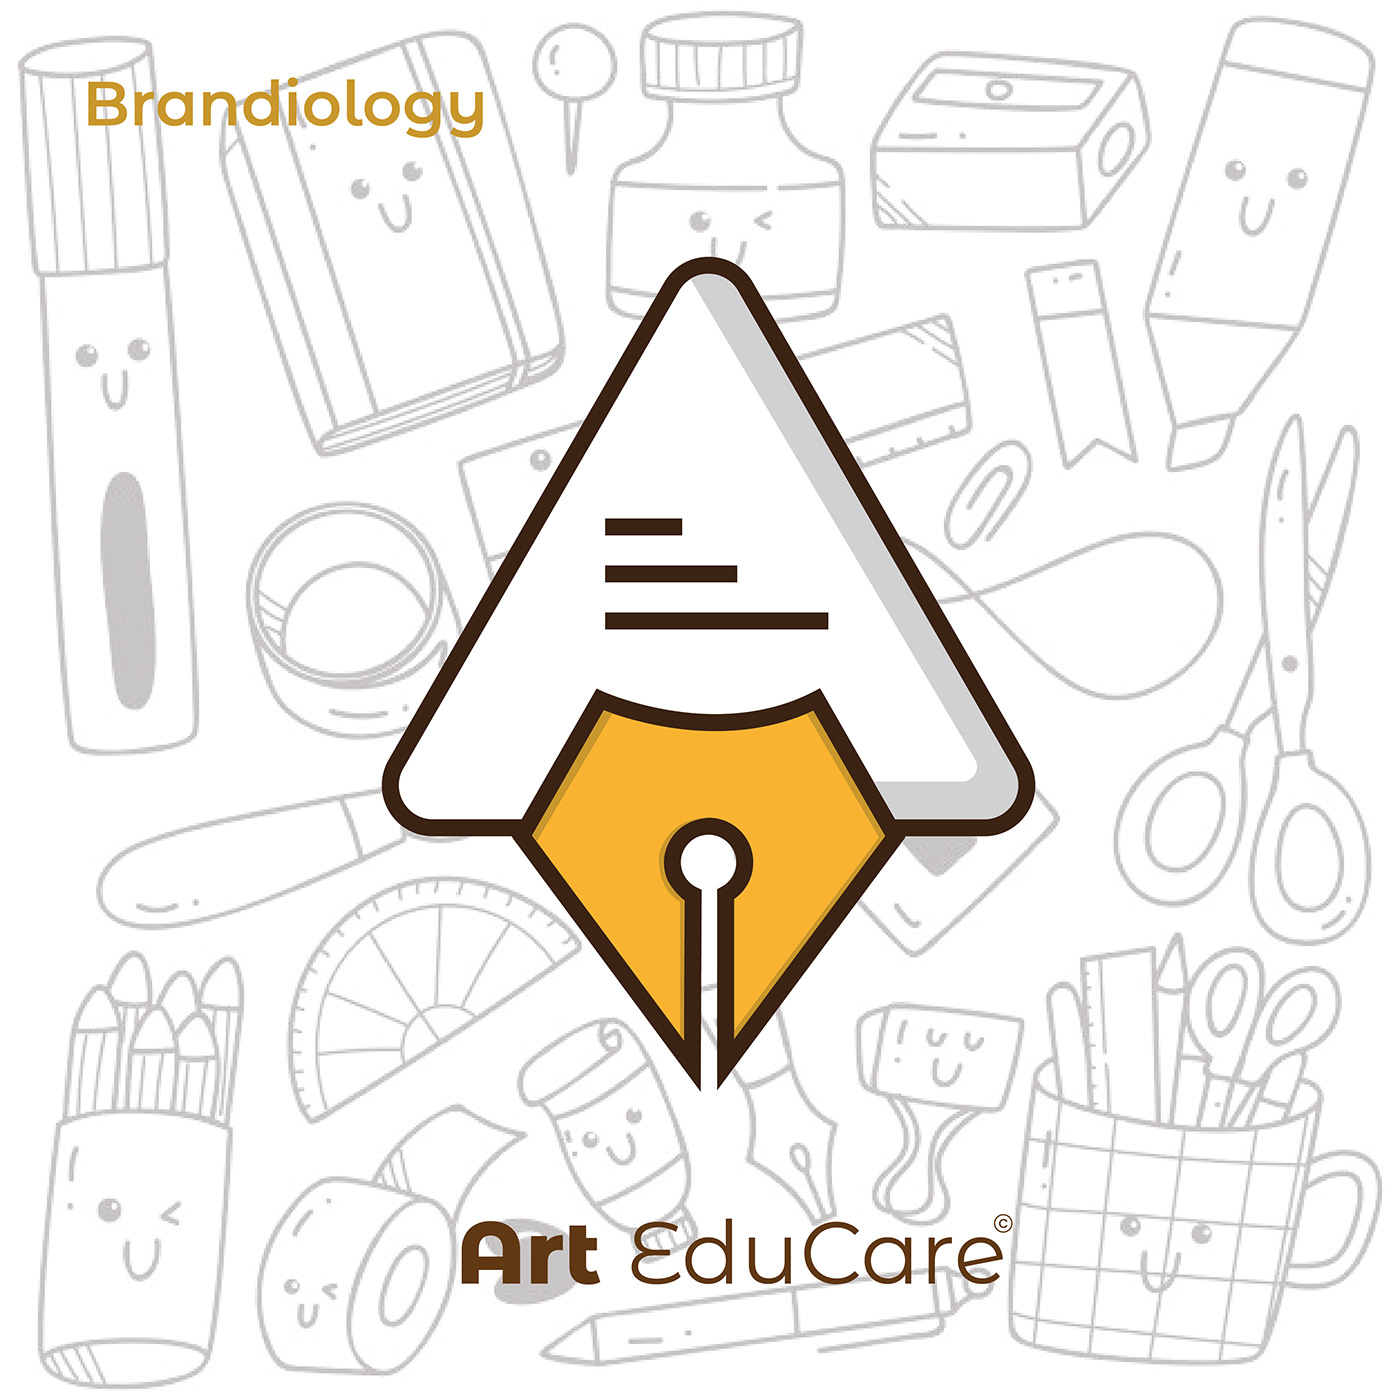  That is Art Educational Institute providing fine arts fundamental knowledge for learners.